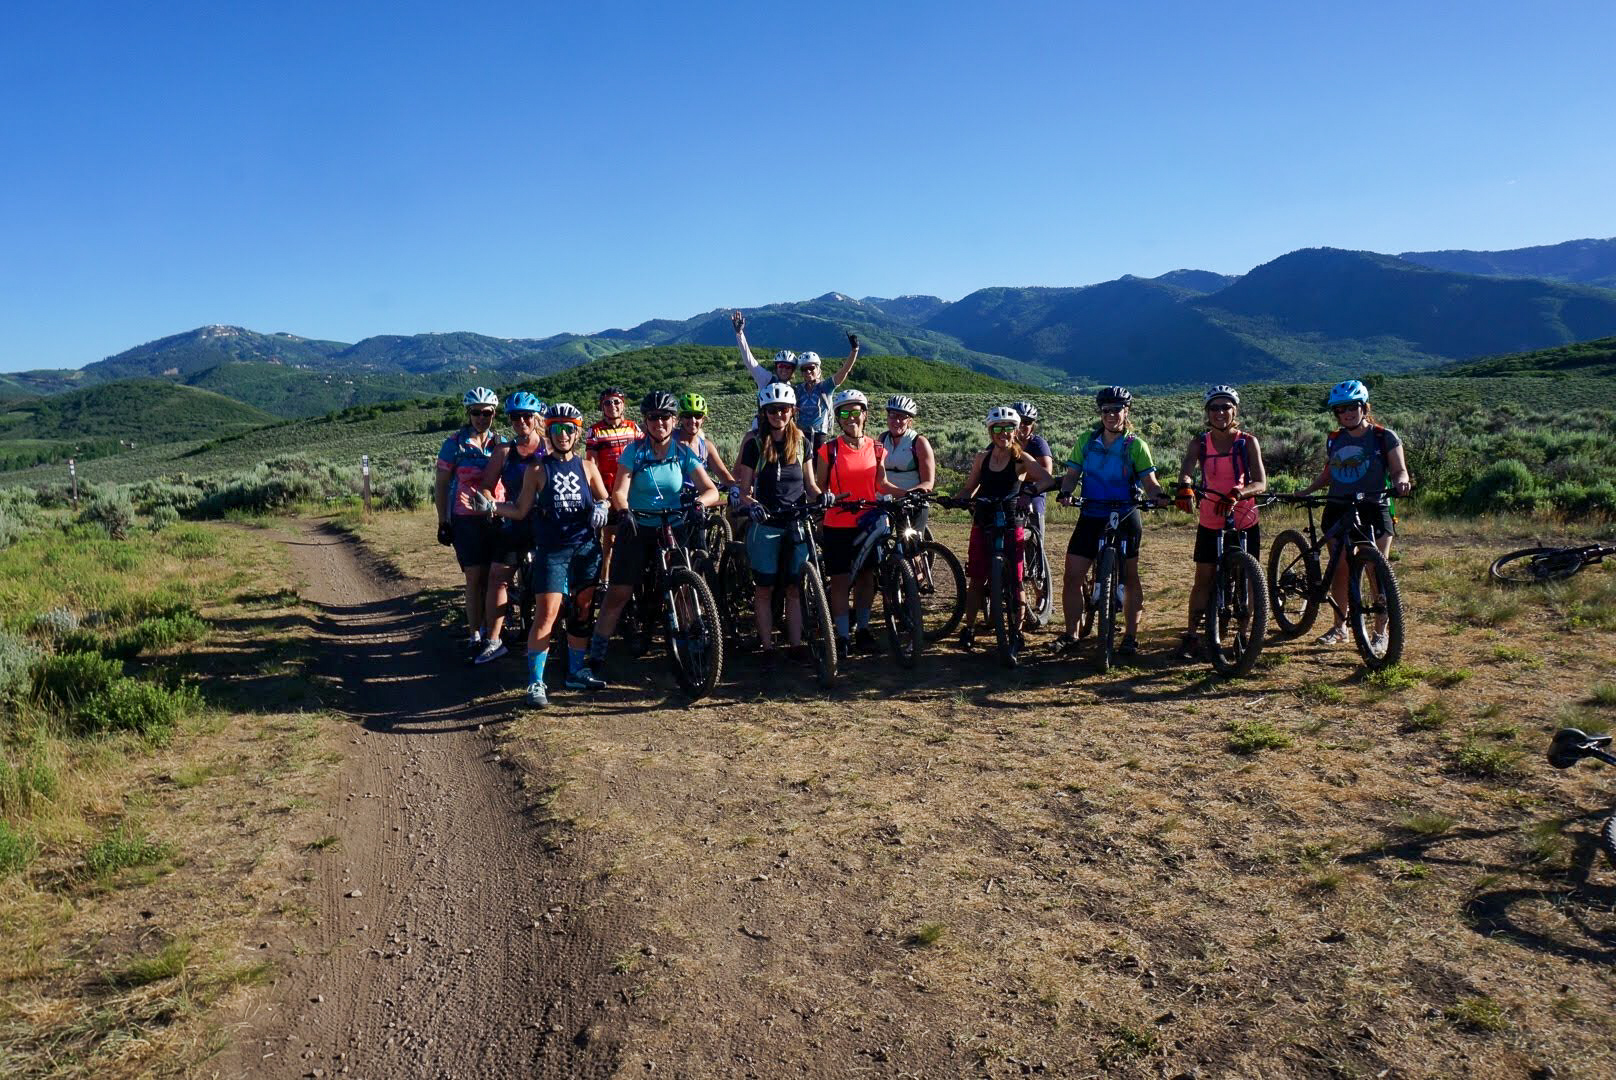 Women with mountain bikes pose for a group photo